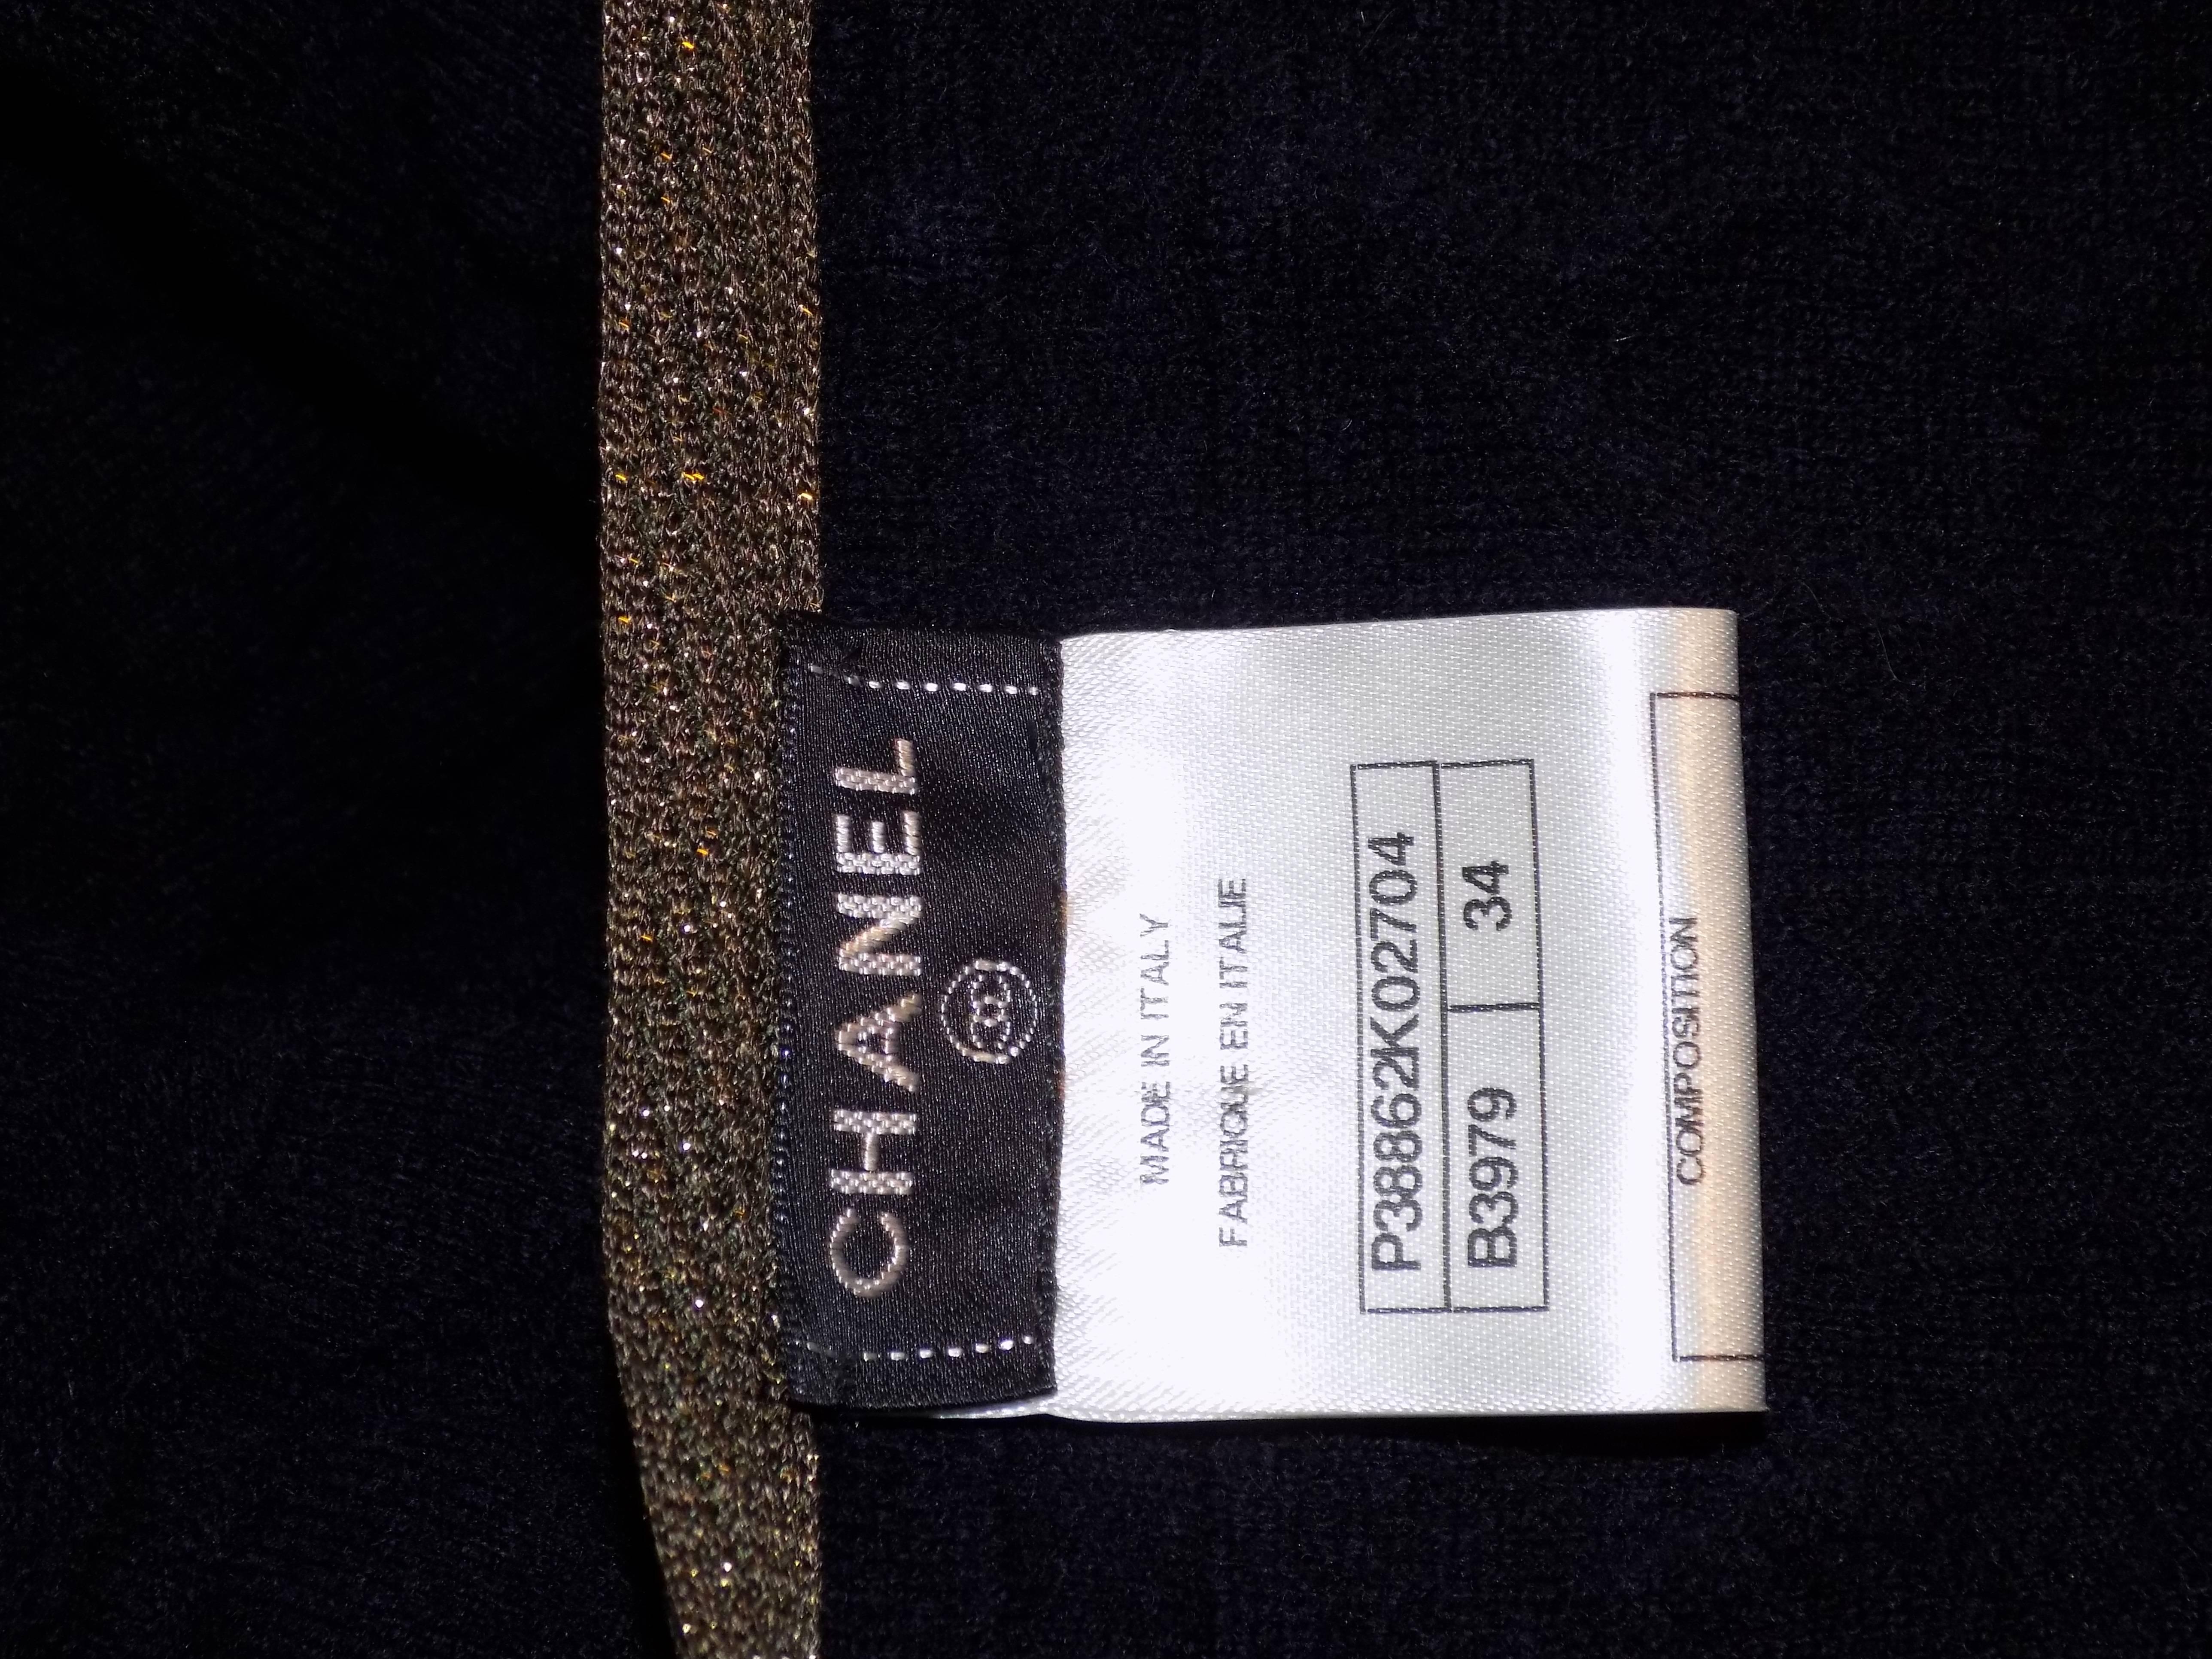 Chanel raise/ quilted knit navy dress and jacket with Lesage patch 5